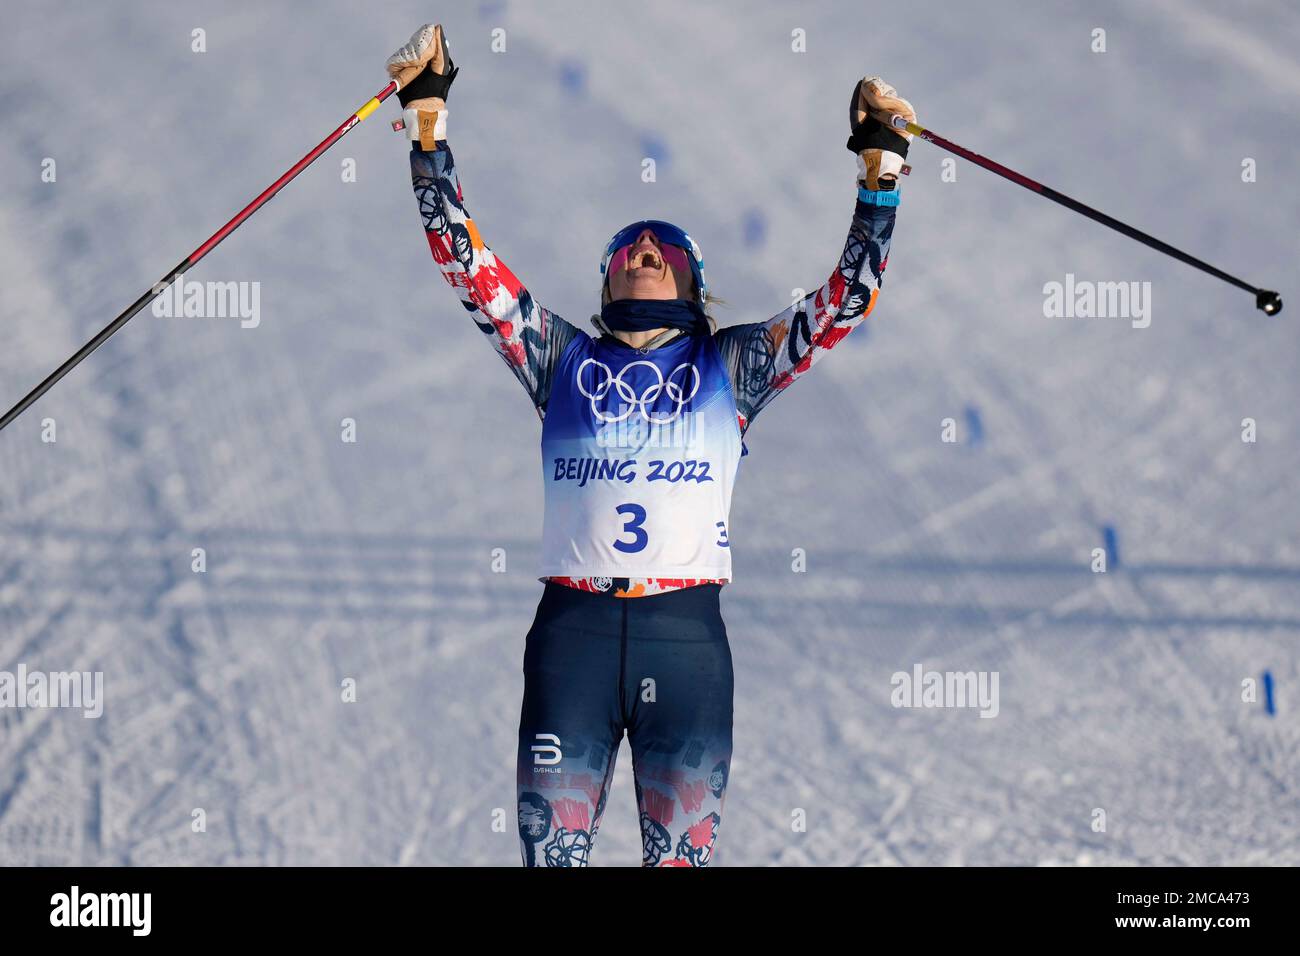 Norways Therese Johaug celebrates after winning the gold medal in the womens 7.5km + 7.5km Skiathlon cross-country skiing competition at the 2022 Winter Olympics, Saturday, Feb